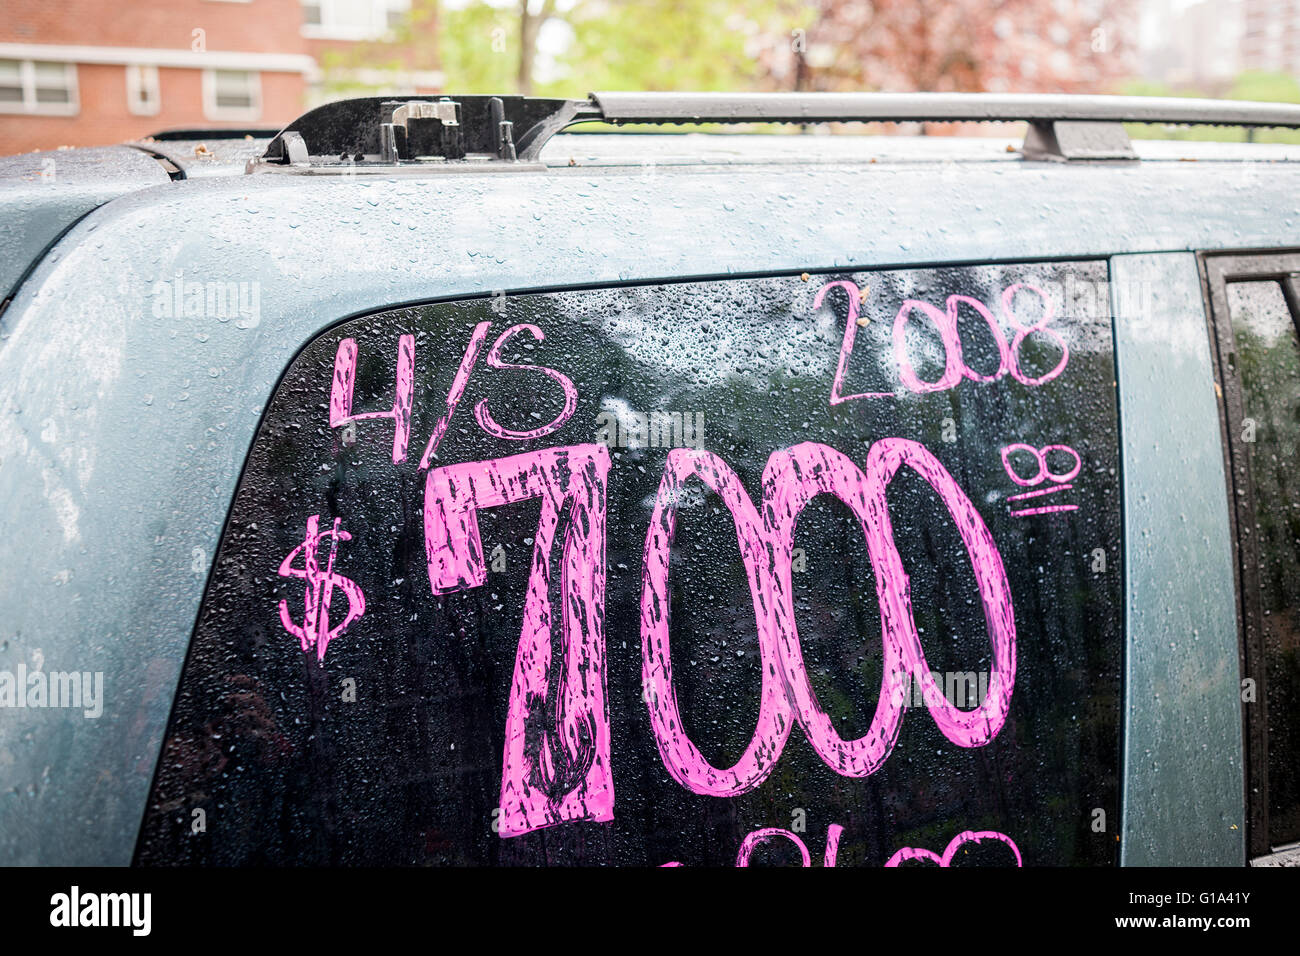 An owner writes the pertinent information on the window of his 8-year old vehicle for sale in the Chelsea neighborhood of New York, seen on Friday, May 6, 2016. (© Richard B. Levine) Stock Photo